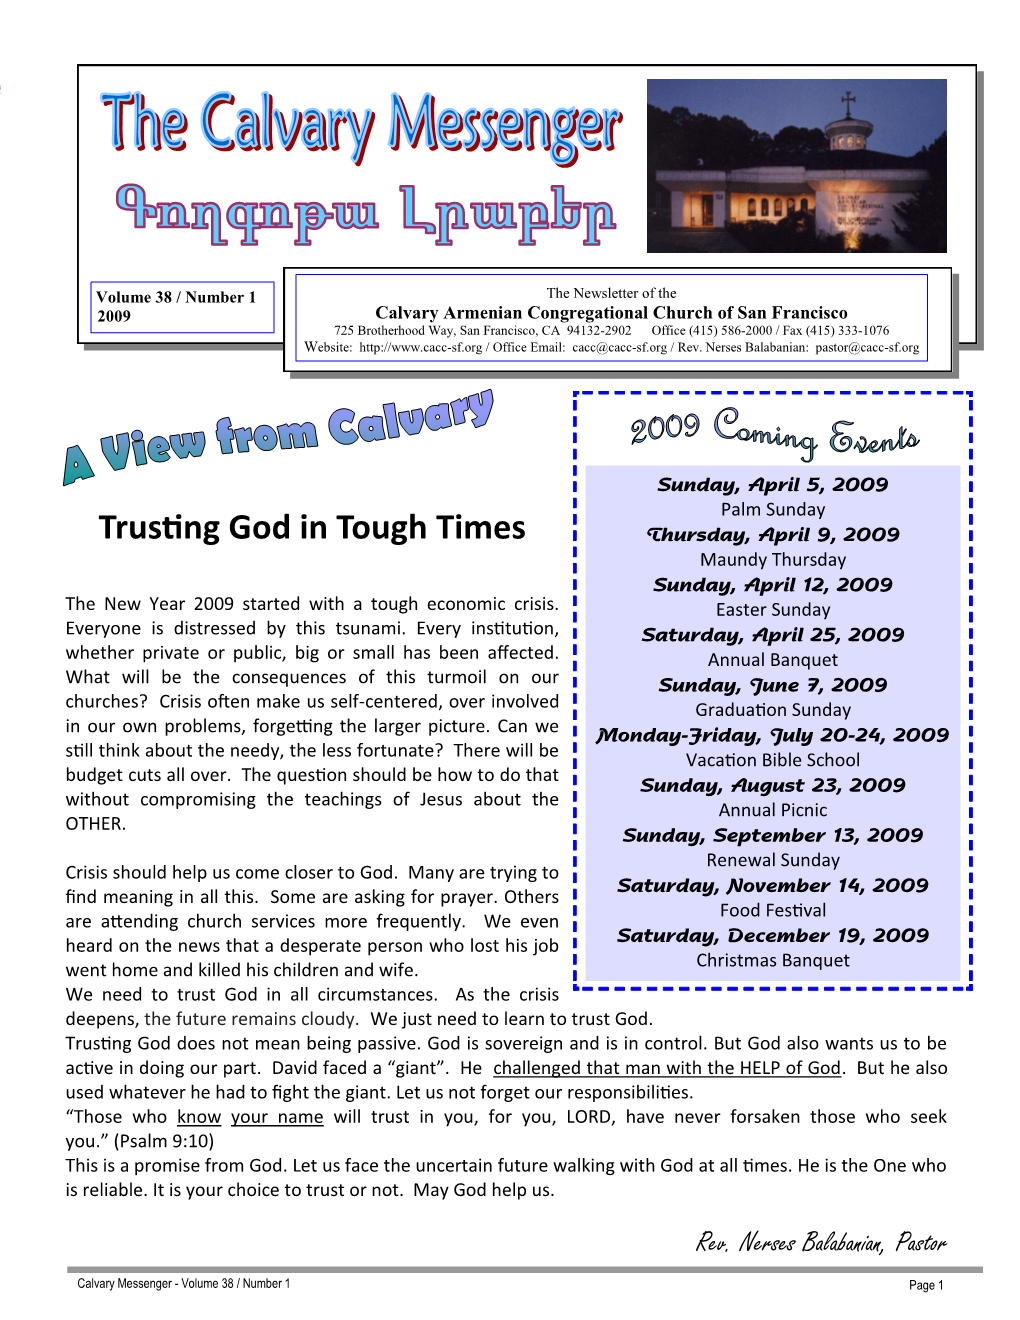 Trusting God in Tough Times Thursday, April 9, 2009 Maundy Thursday Sunday, April 12, 2009 the New Year 2009 Started with a Tough Economic Crisis